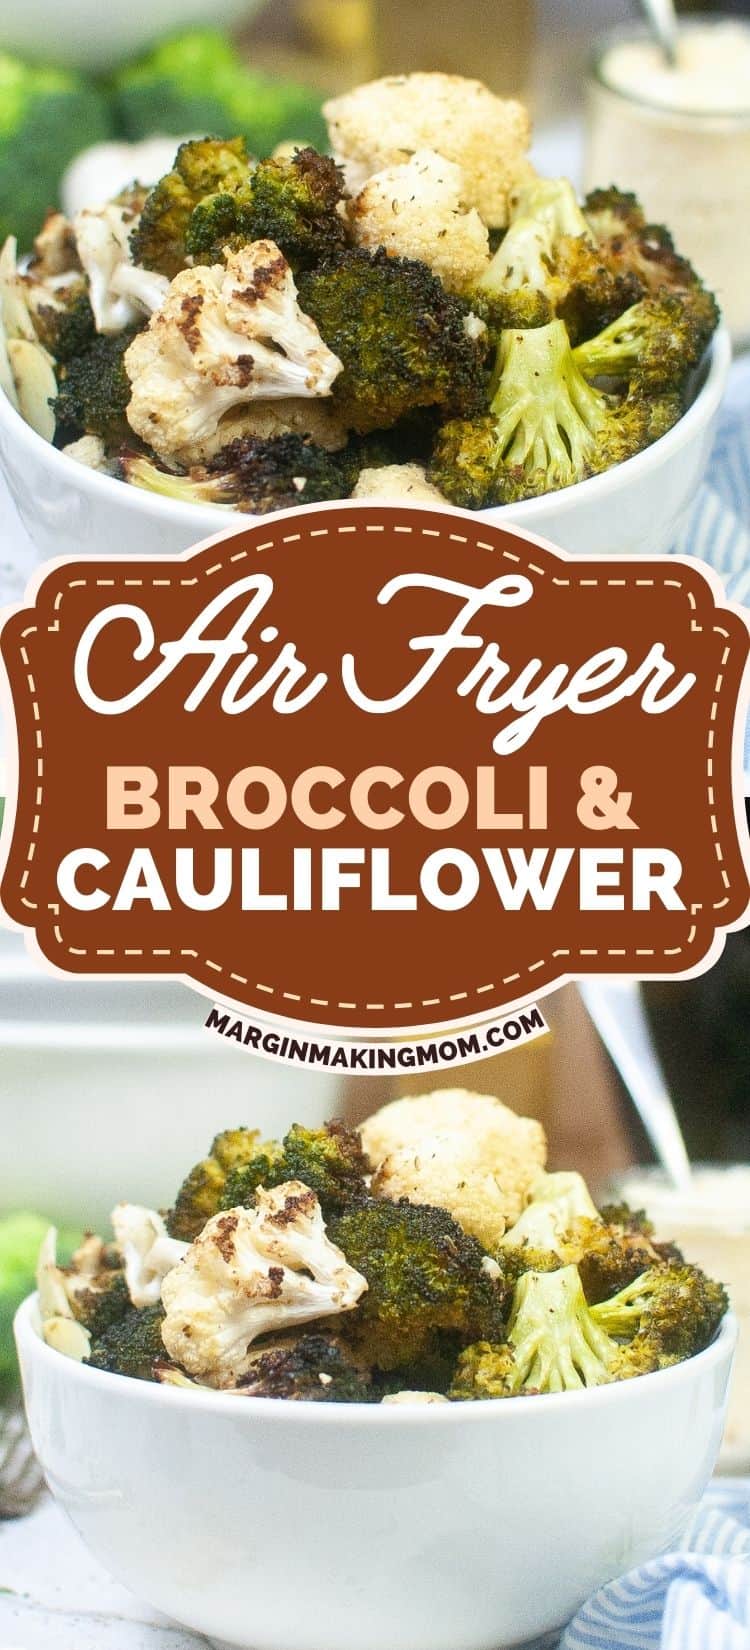 two photos; one shows a side view of a bowl of air fryer broccoli and cauliflower, while the other shows a close-up view of the vegetables